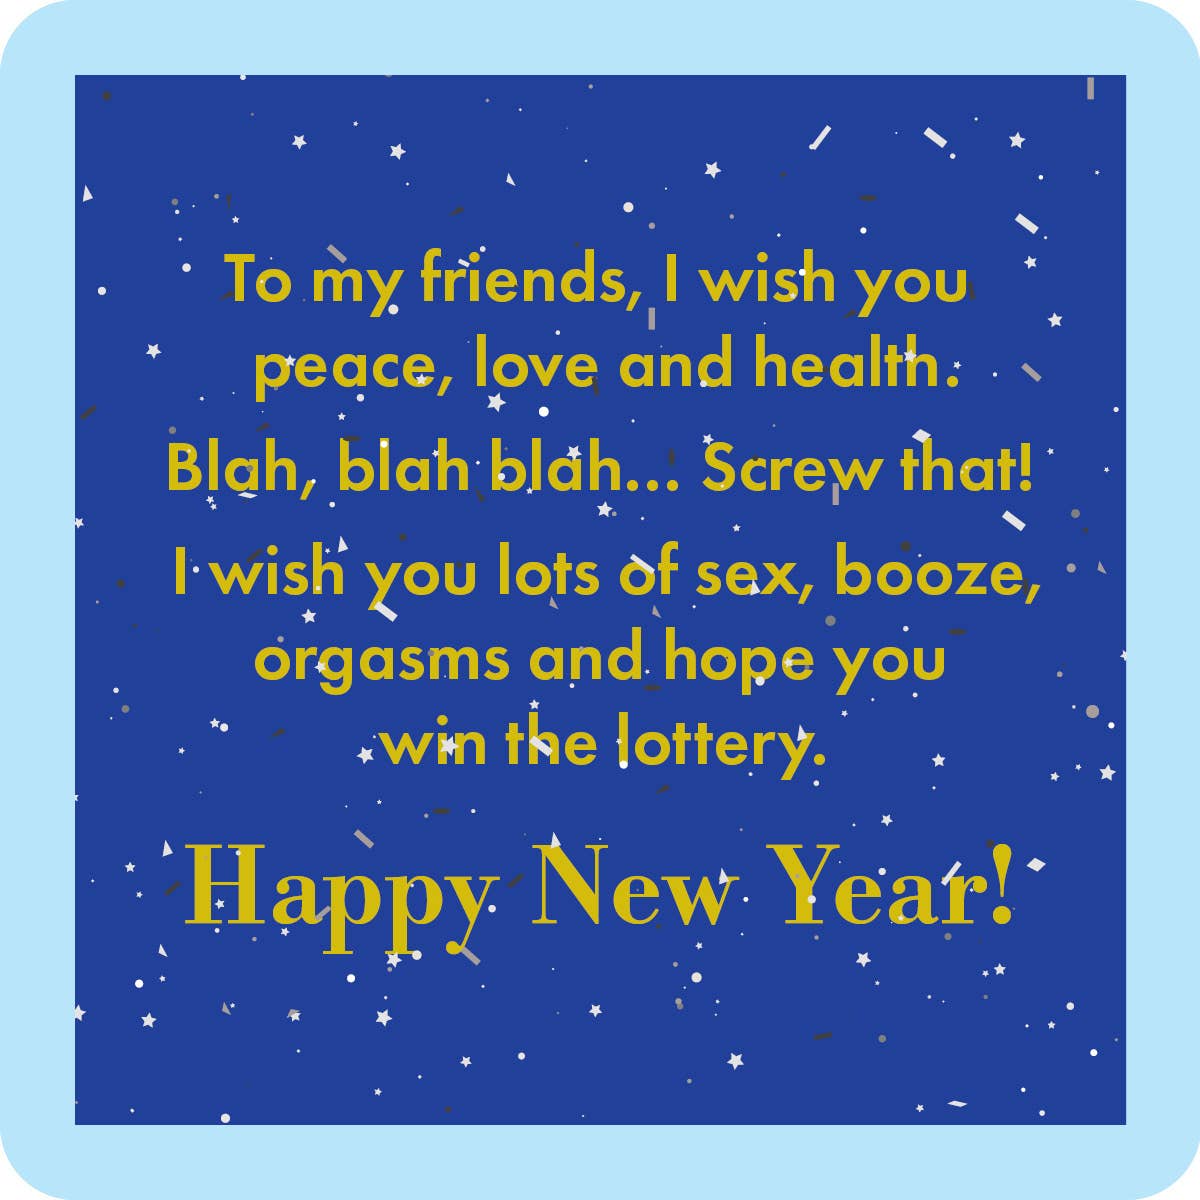 Drinks on Me coasters - To my friends, I wish you peace… Happy New Year